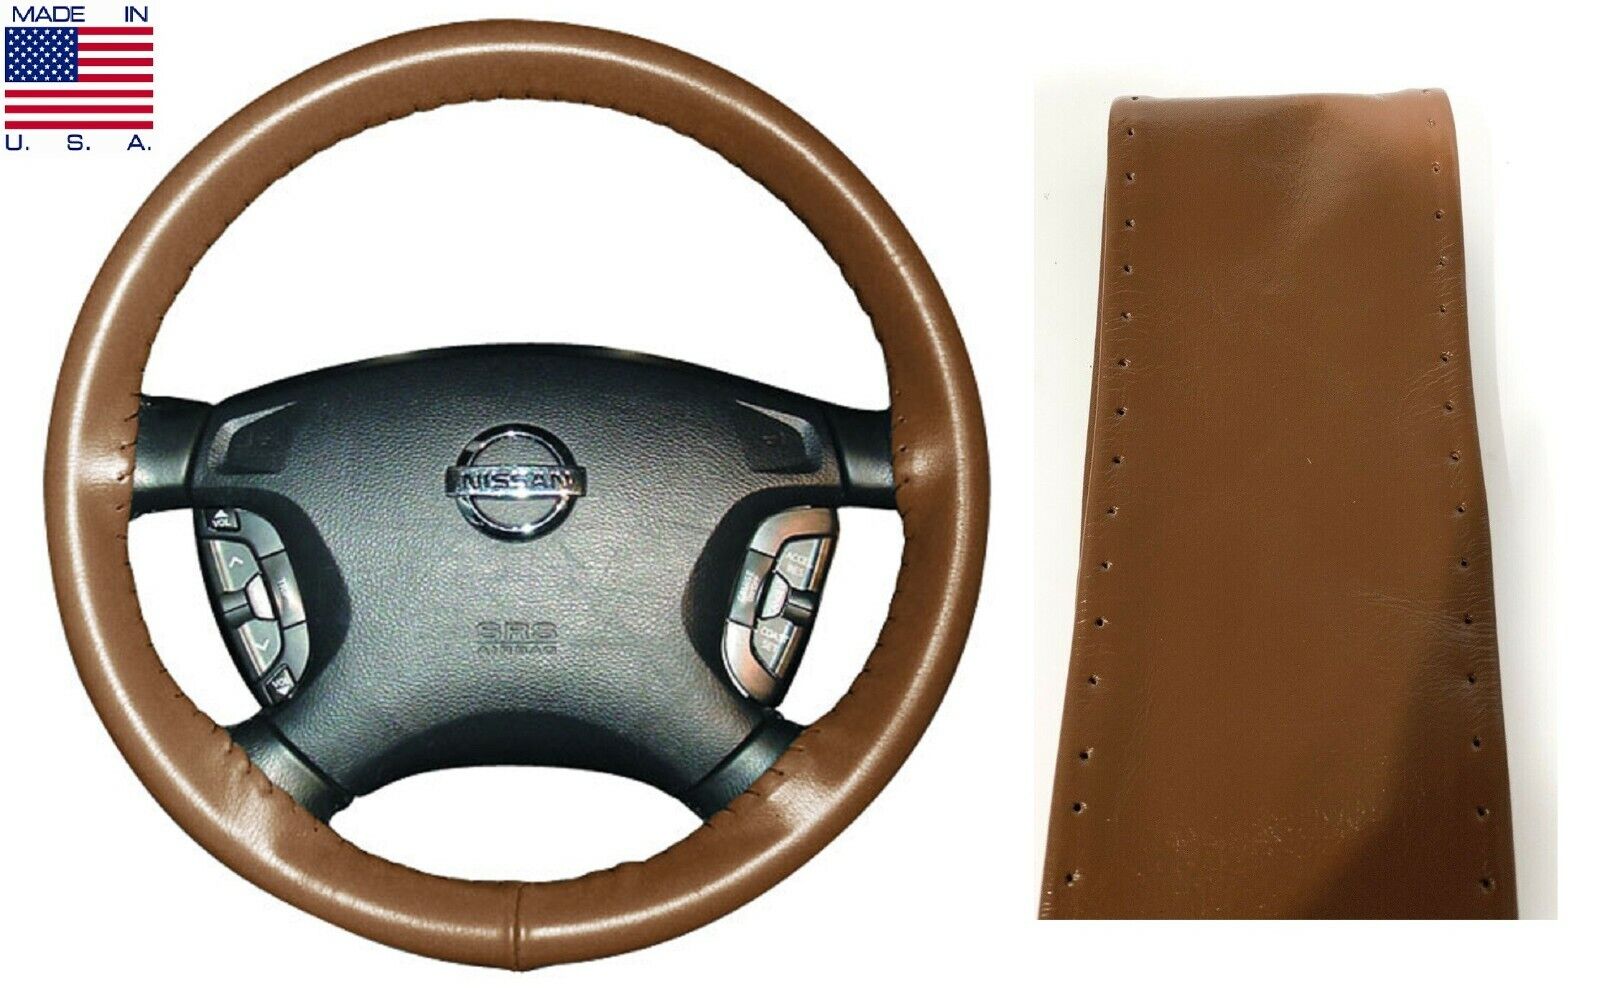 Tan Genuine Leather Steering Wheel Cover AXX For Ford Lincoln & Other Makes